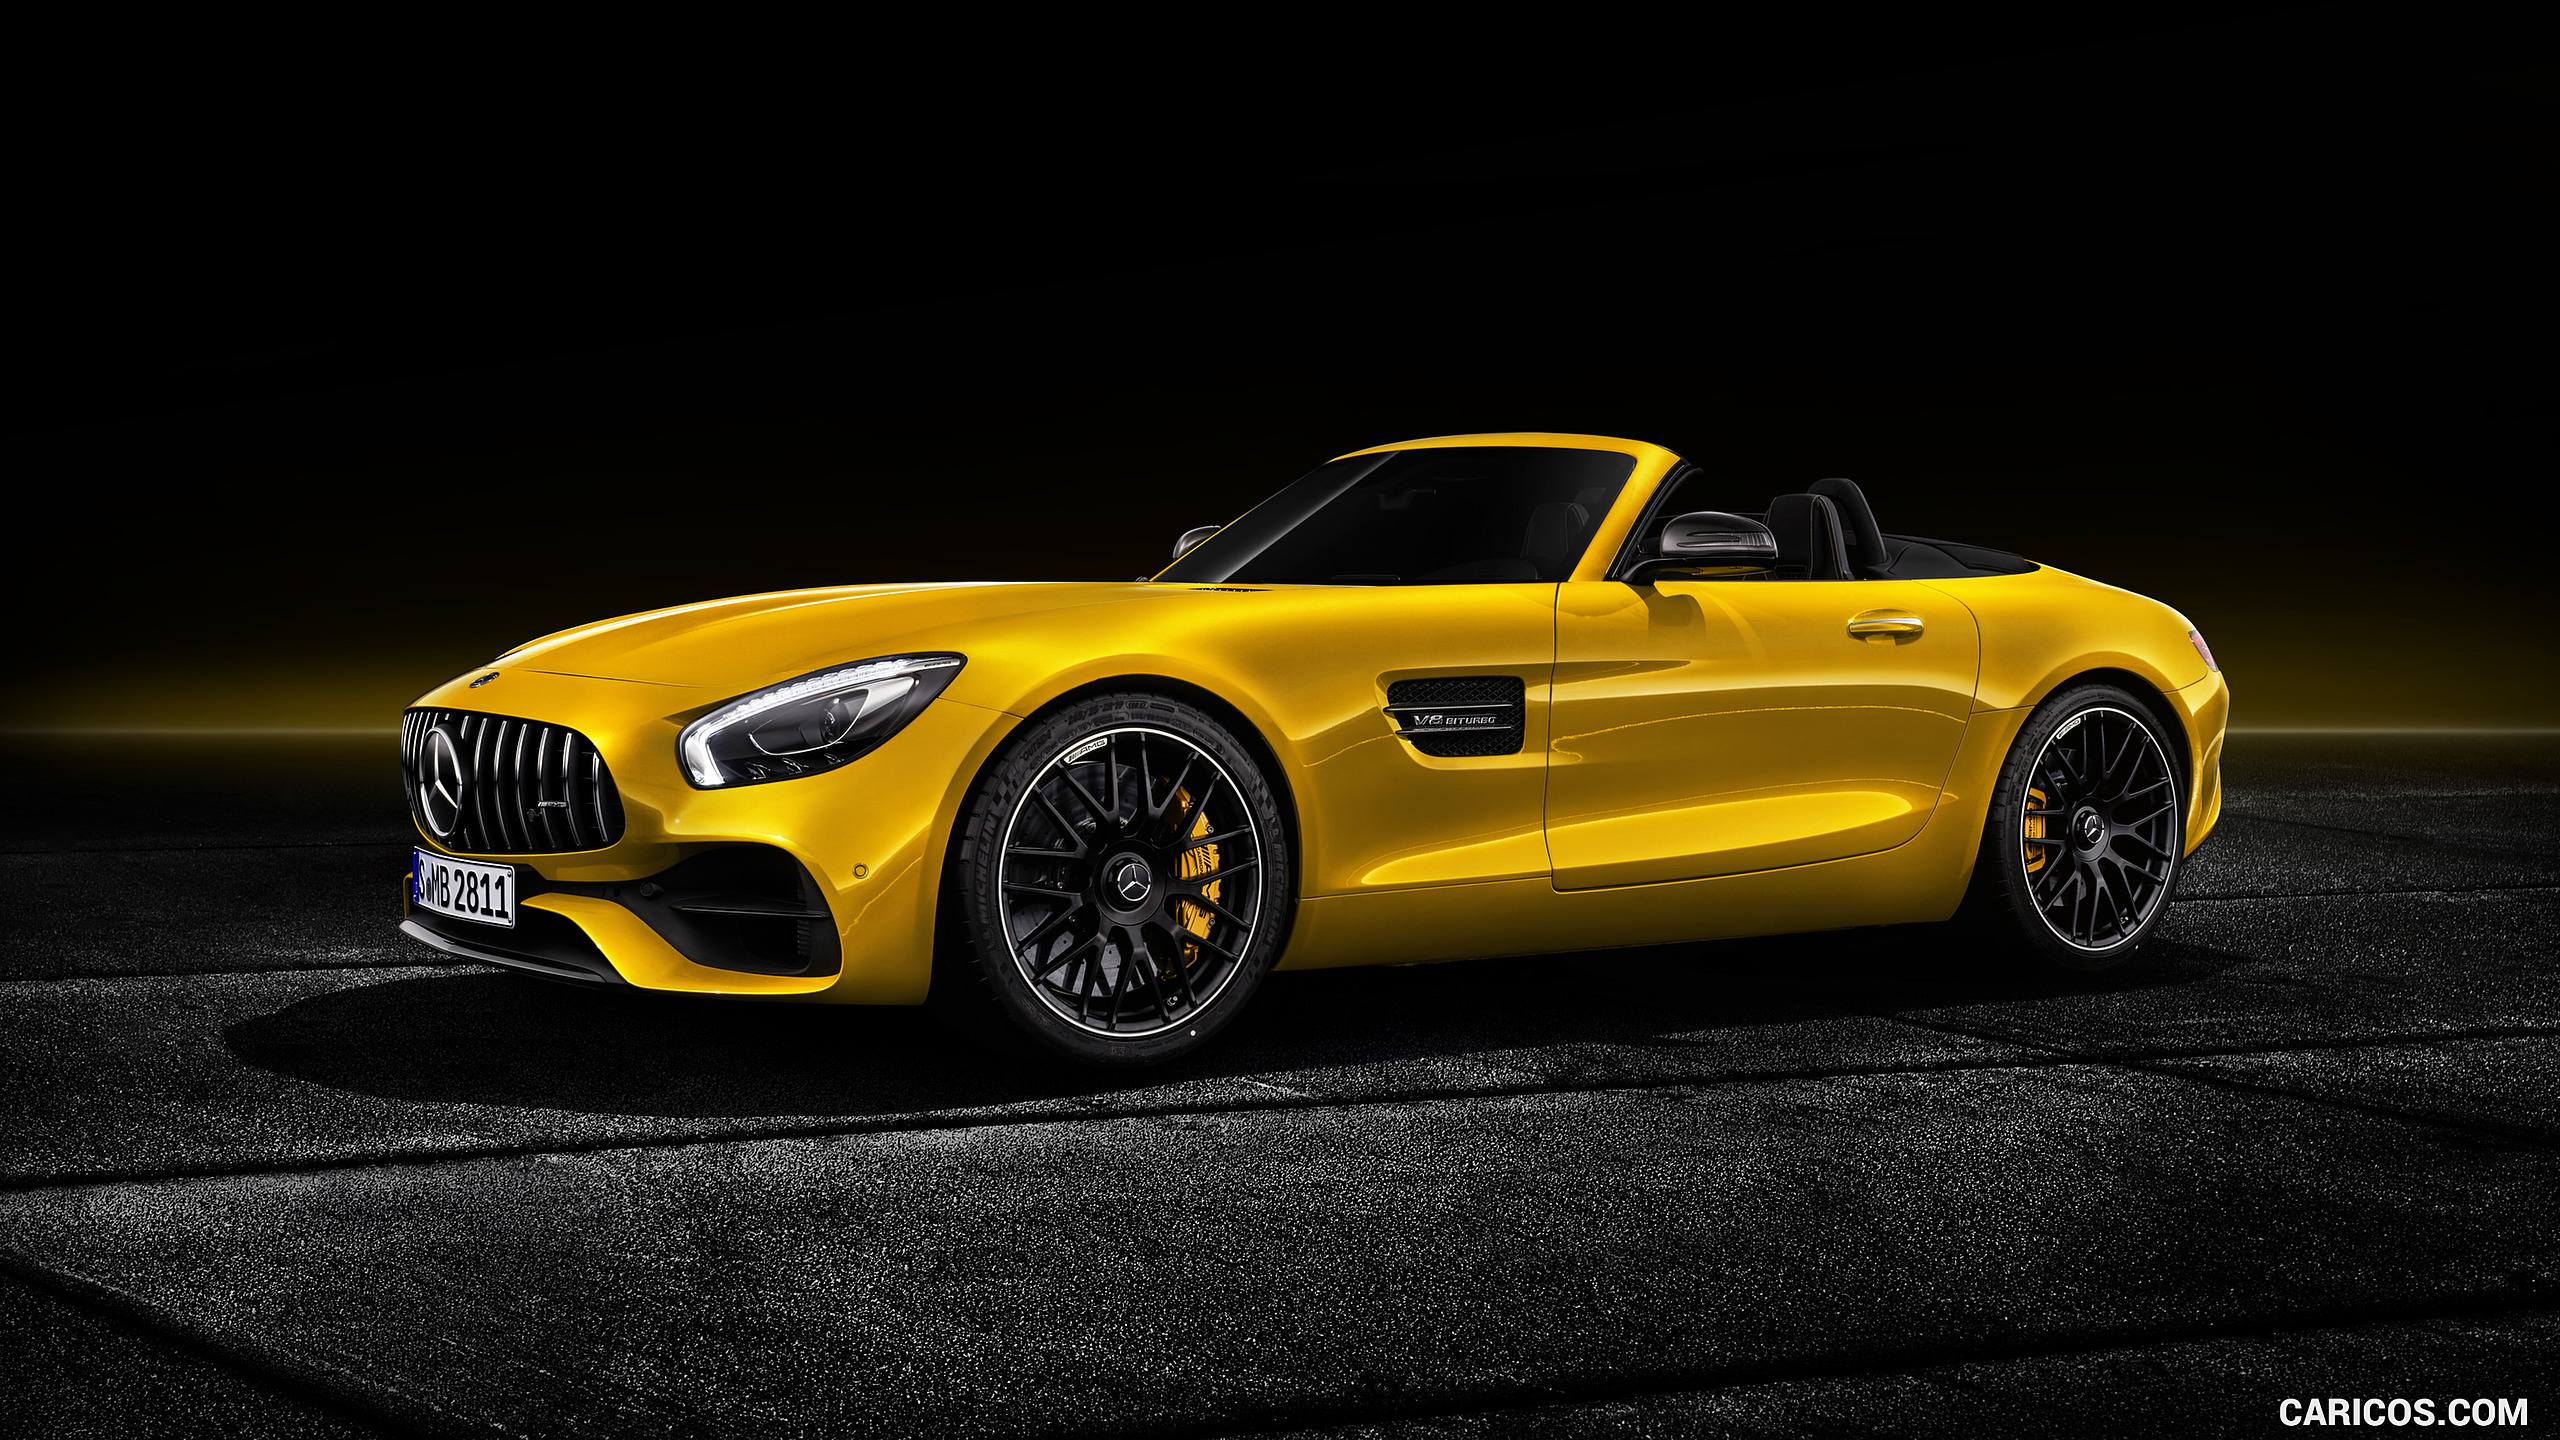 2019 Mercedes-AMG GT S Roadster (Color: Solarbeam), #6 of 11